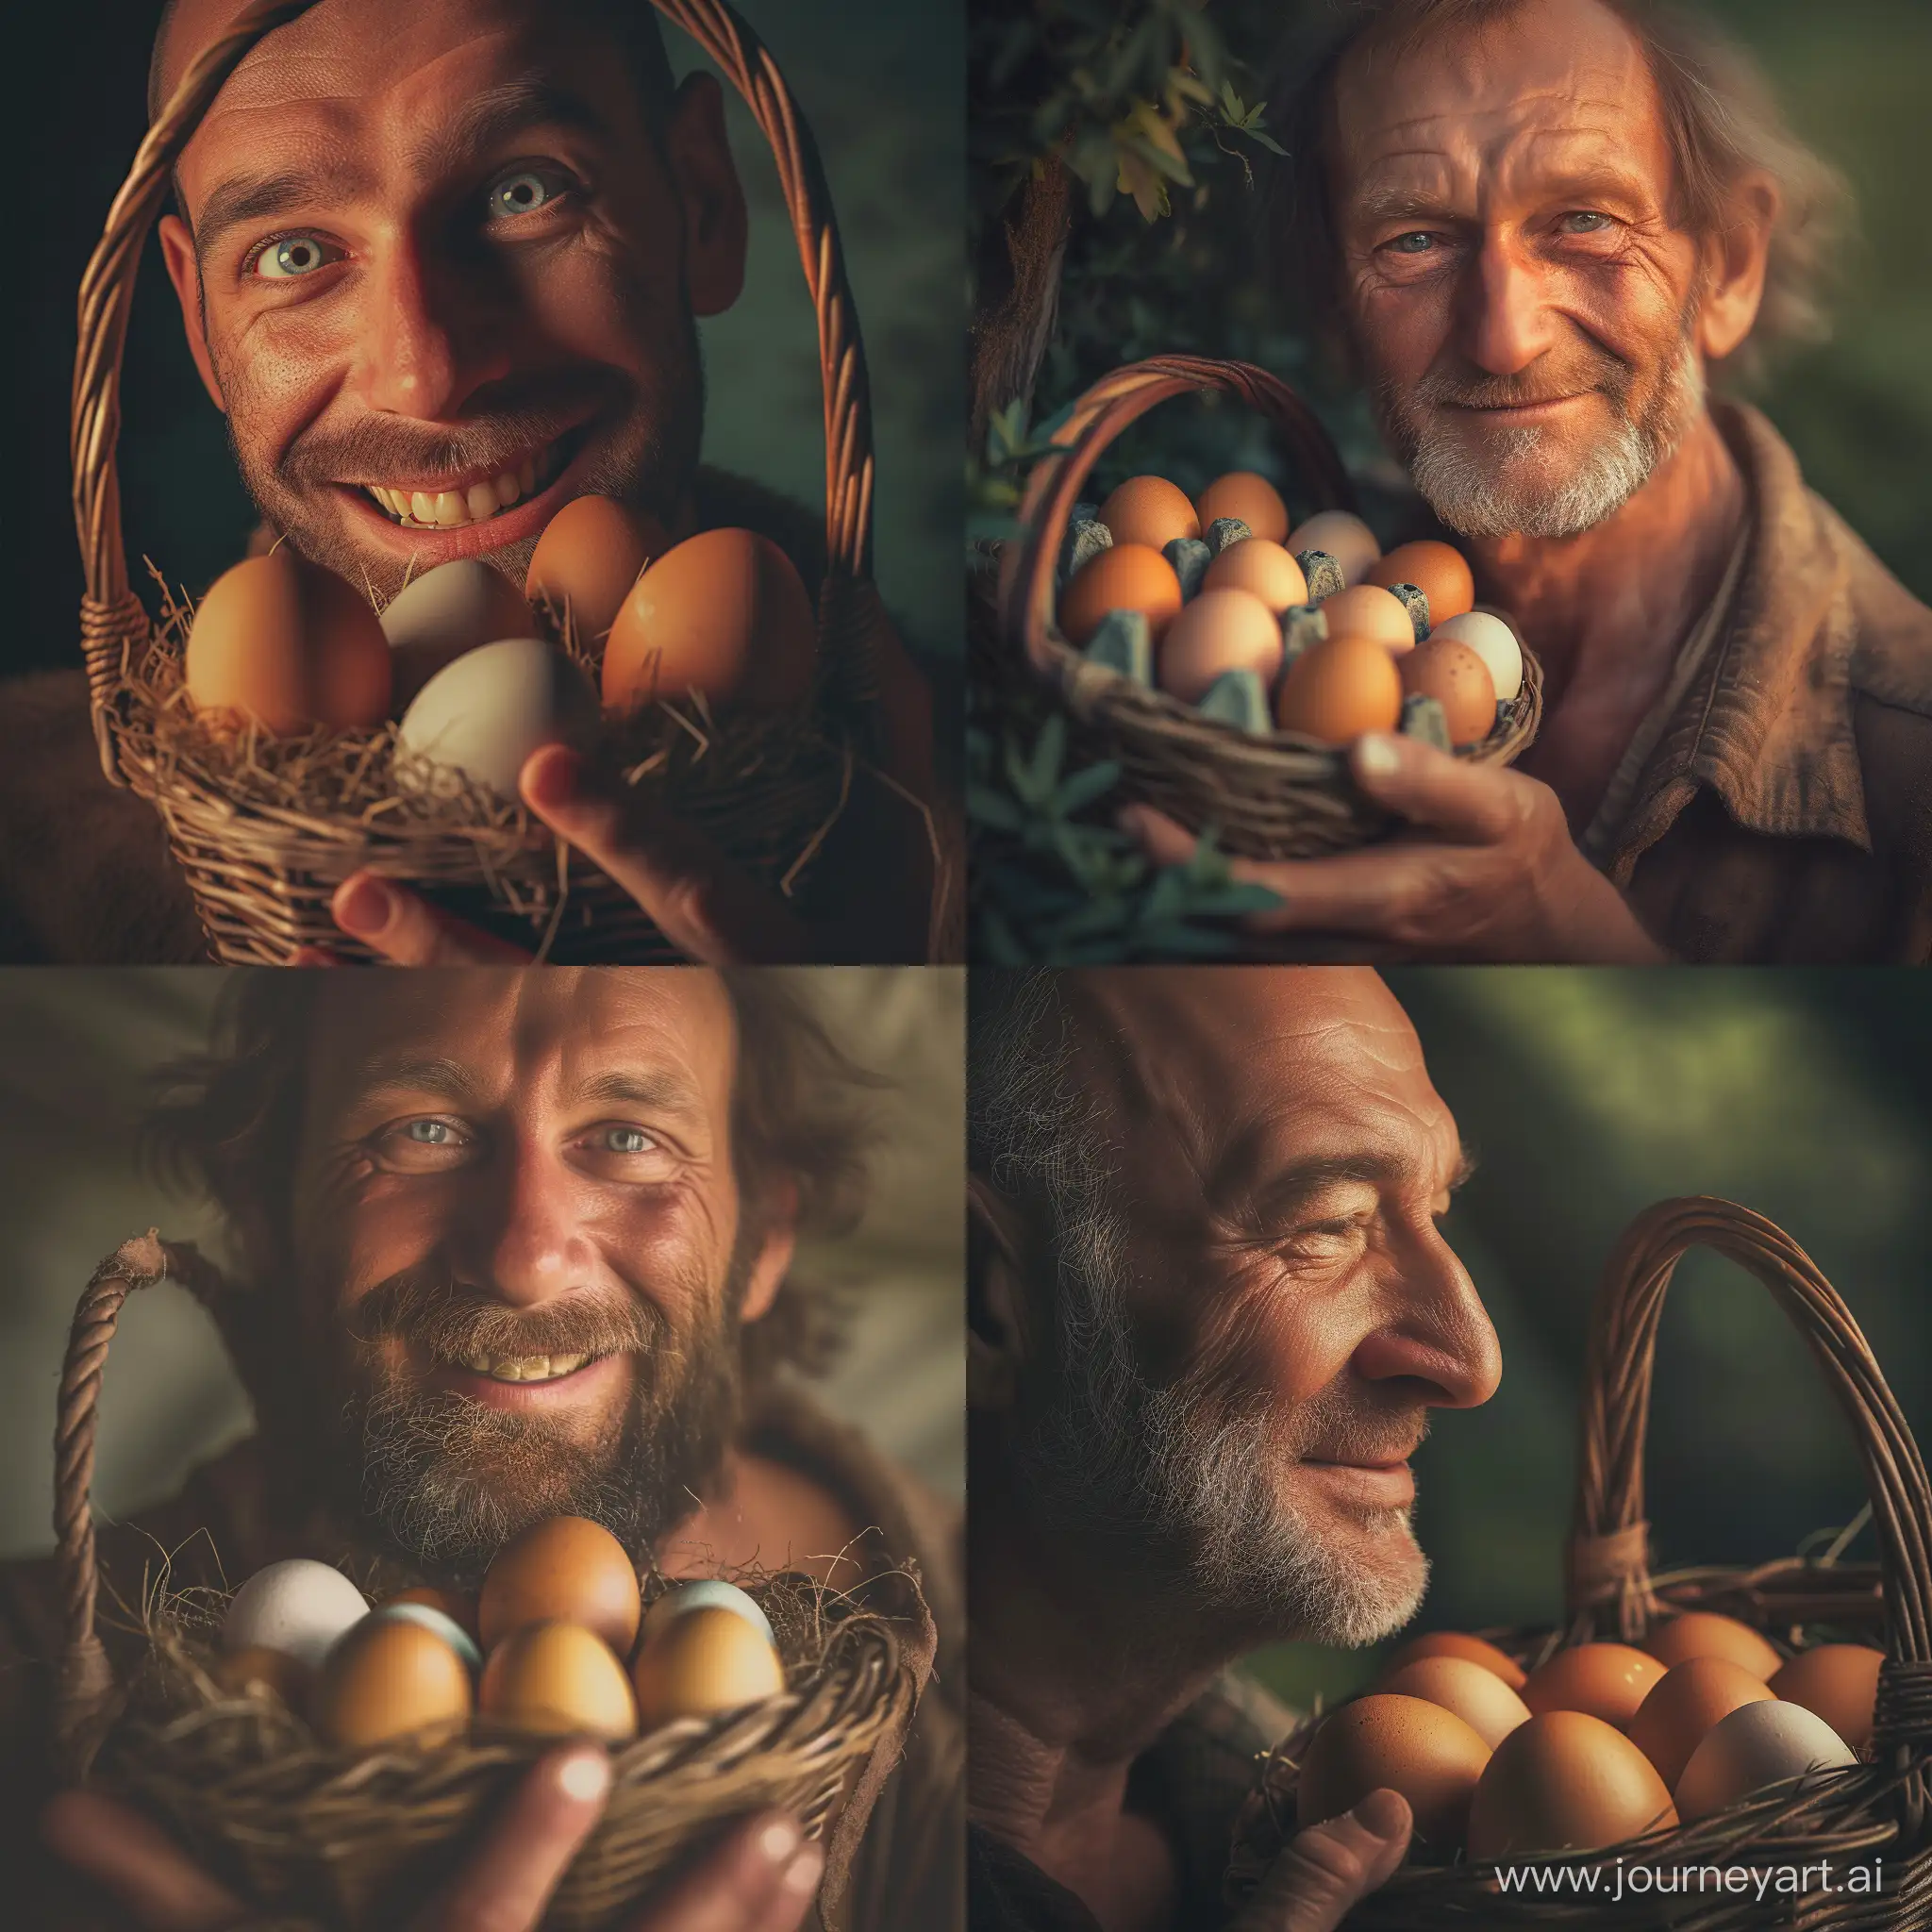 A real man with a kind face and a beautiful smile,
A basket of eggs in the man's hand,
Full details of the man's face and the egg basket,
Egg basket in the middle of the picture, hyperdetailed photography, soft light, summer time, telephoto lens, atmospheric, hyper realistic, 8k, cinematic,